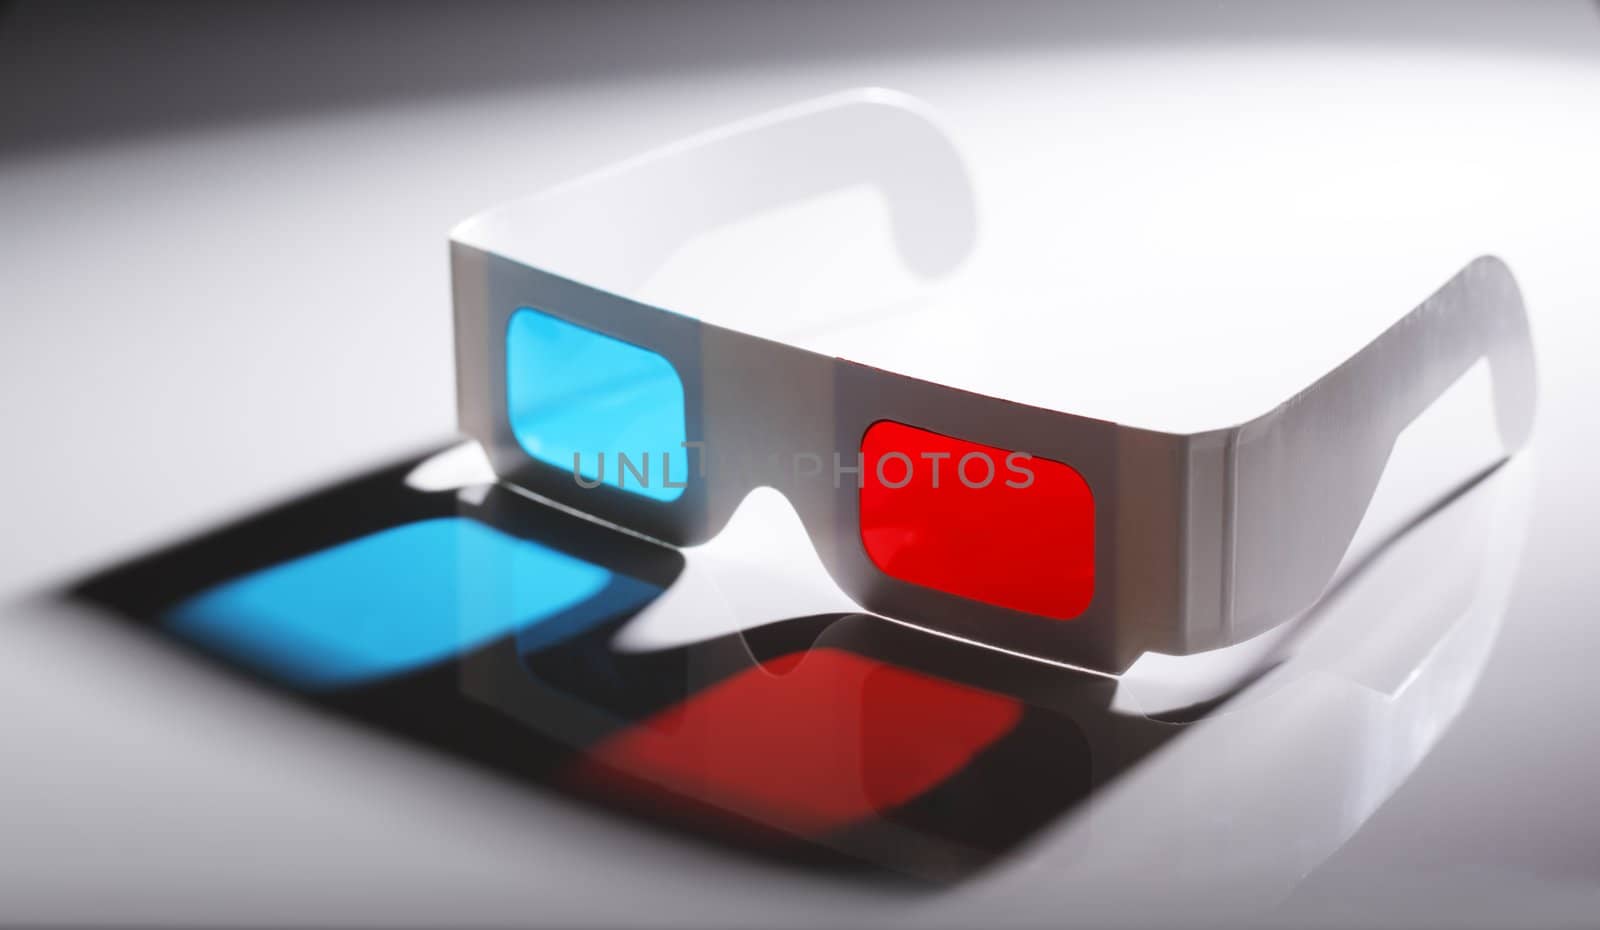 Disposable cardboard 3D Anaglyph glasses with cyan/red lenses.